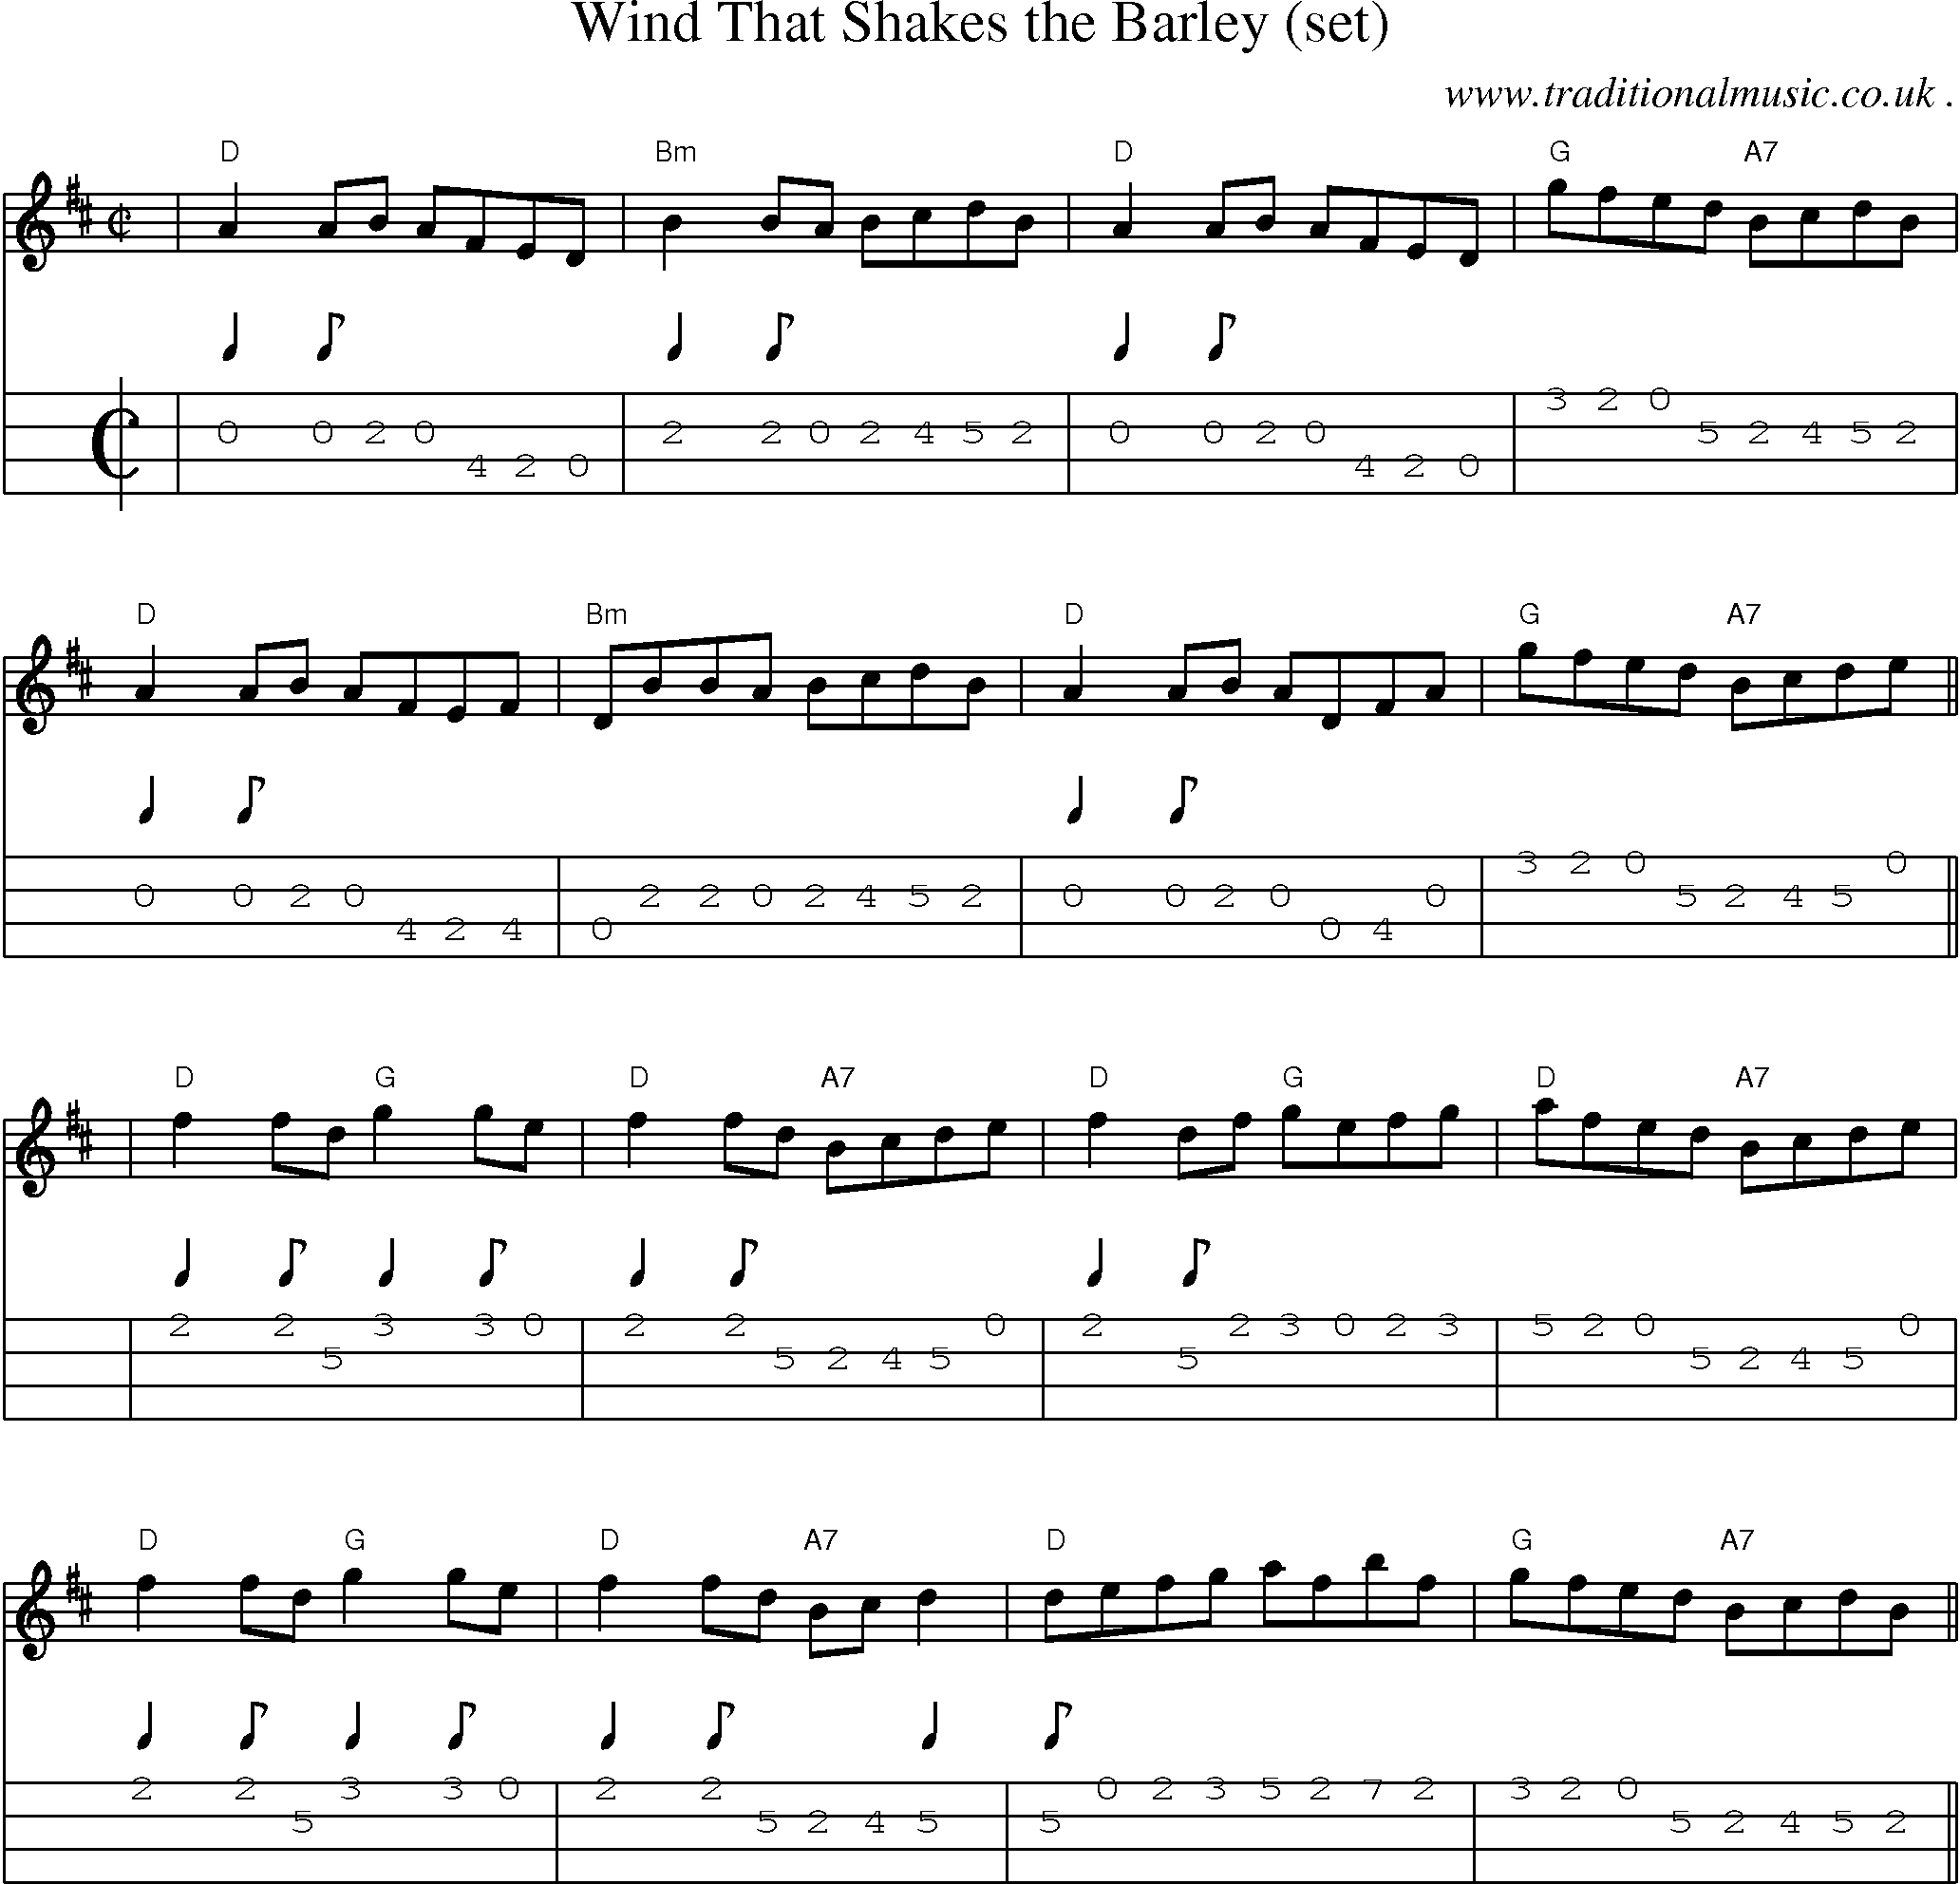 Music Score and Guitar Tabs for Wind That Shakes The Barley (set)